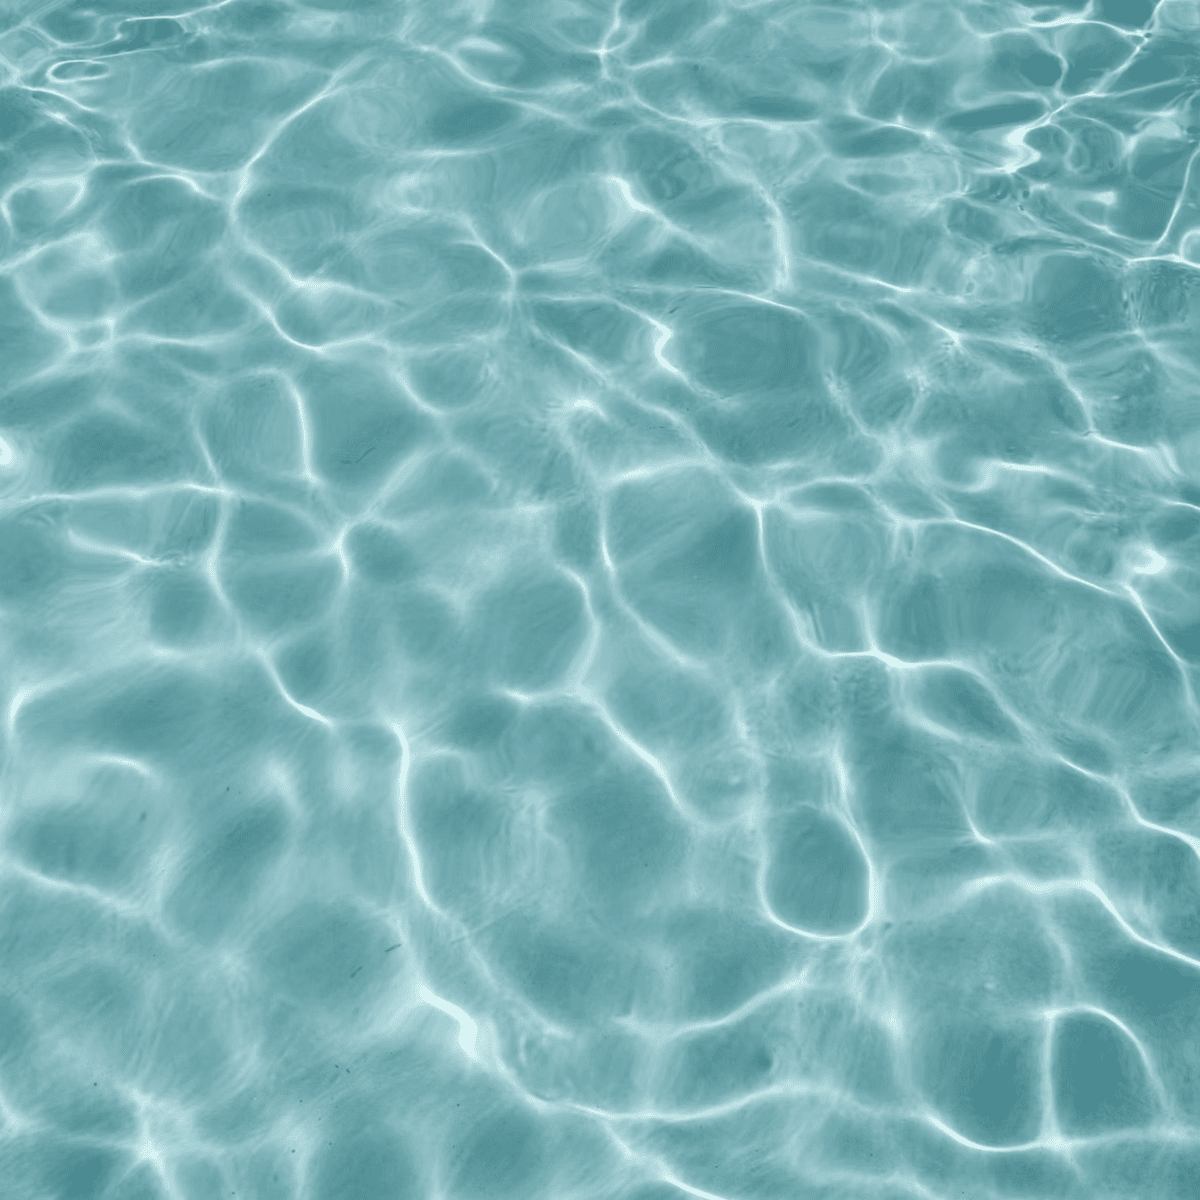 How to Lower Total Alkalinity and Adjust pH in a Swimming Pool